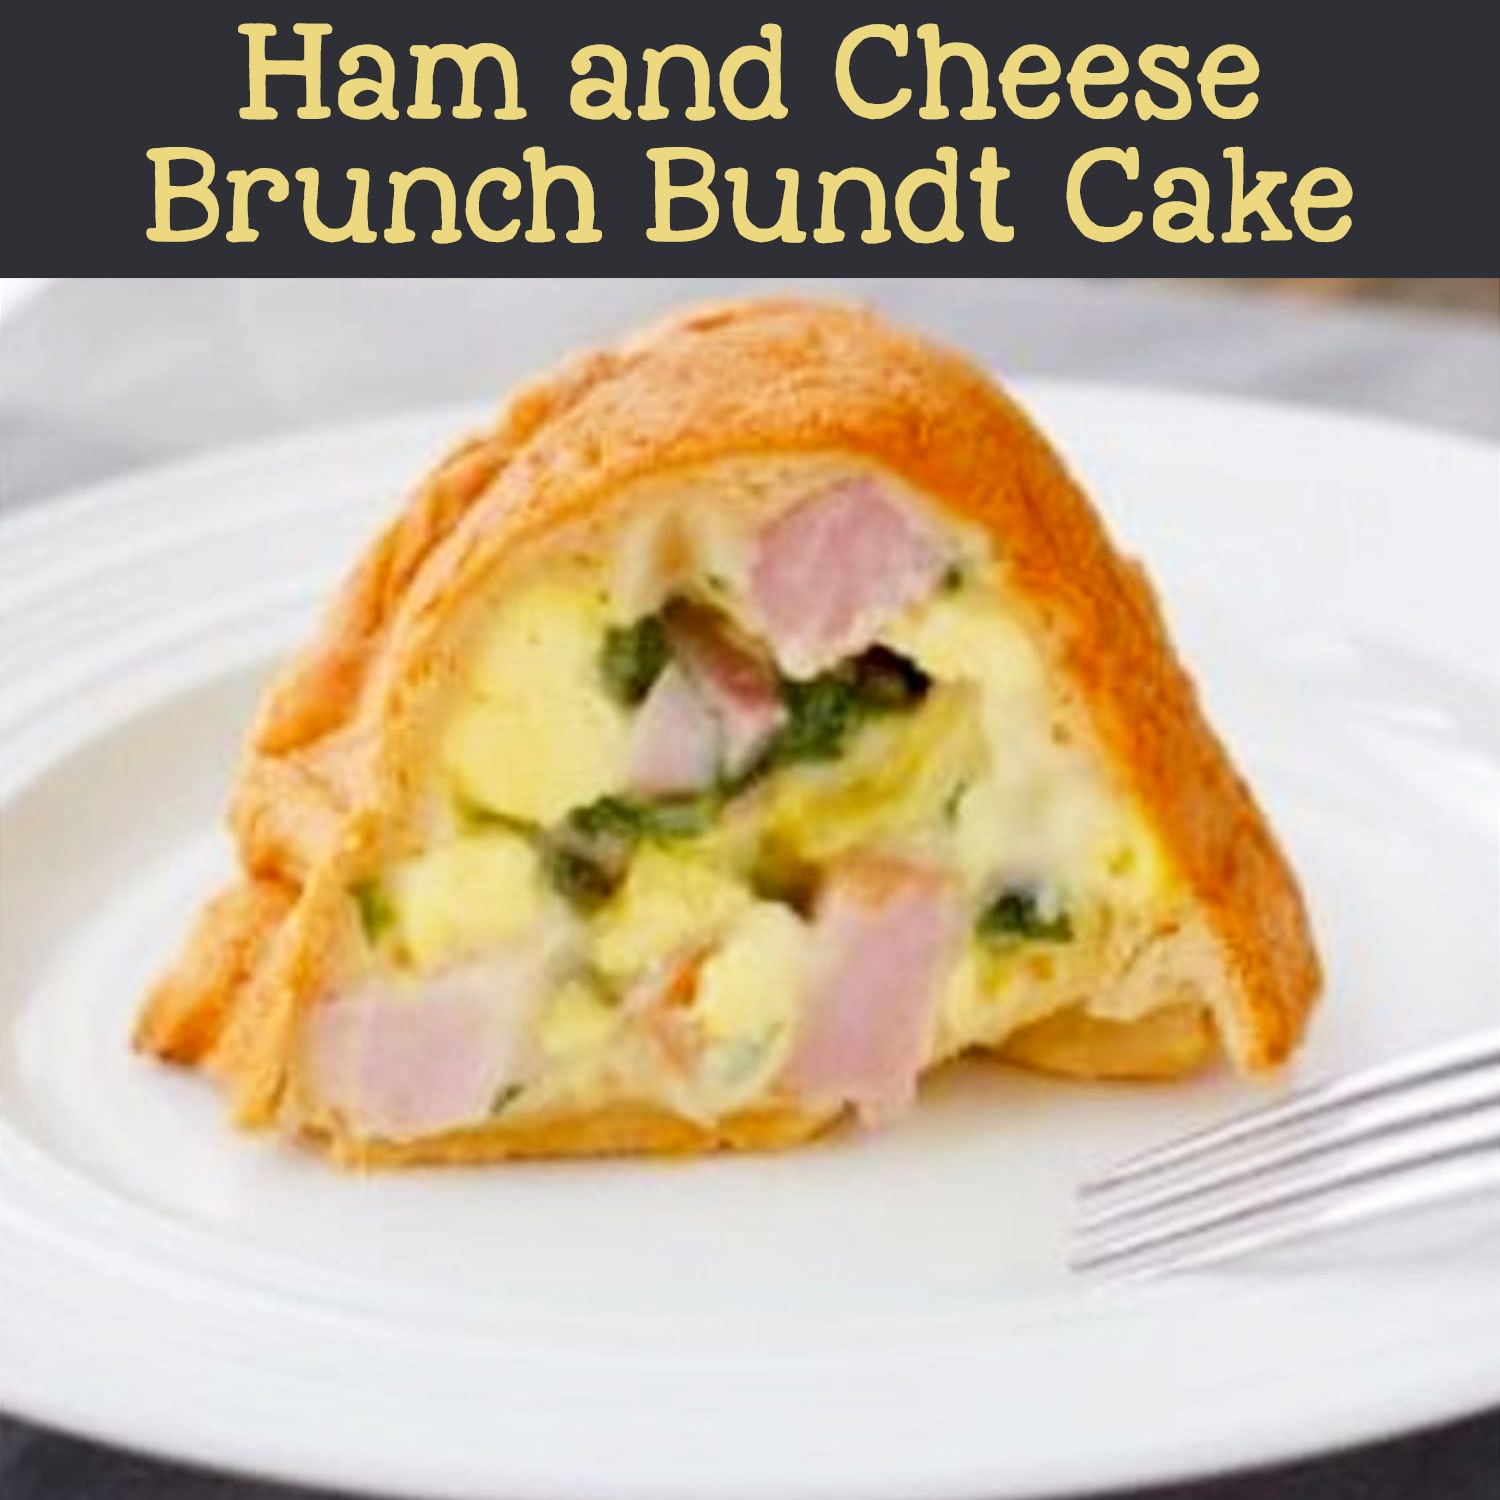 Brunch food ideas and make ahead breakfast recipes for a crowd or for guests.  Ham and cheese brunch bundt cake recipe